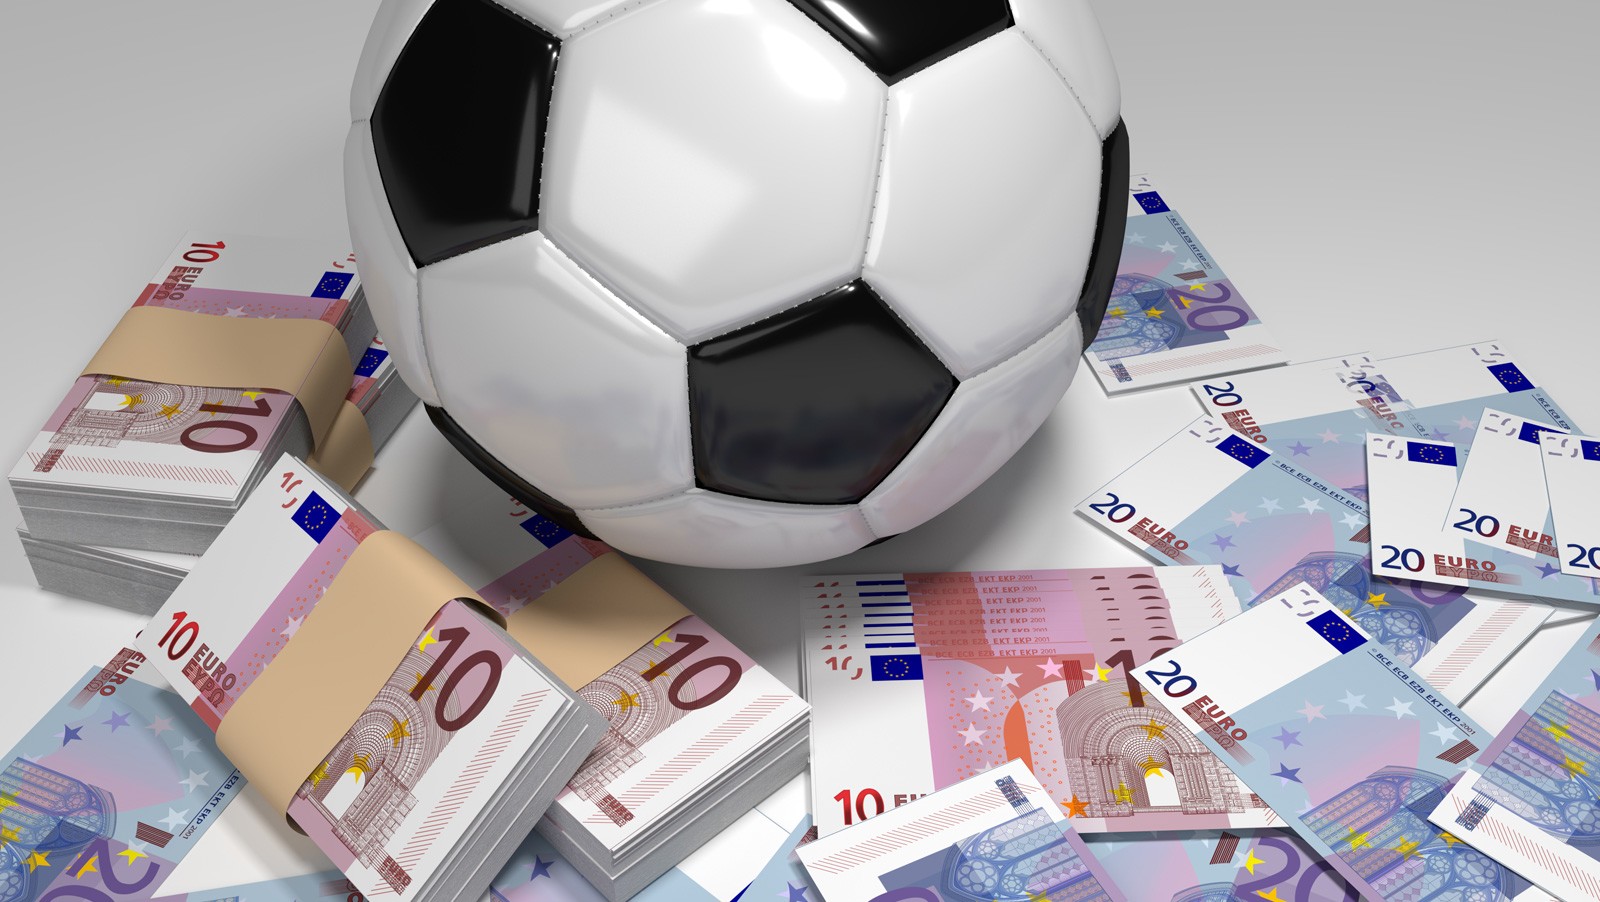 French bettors wagered €690m on 2018 World Cup